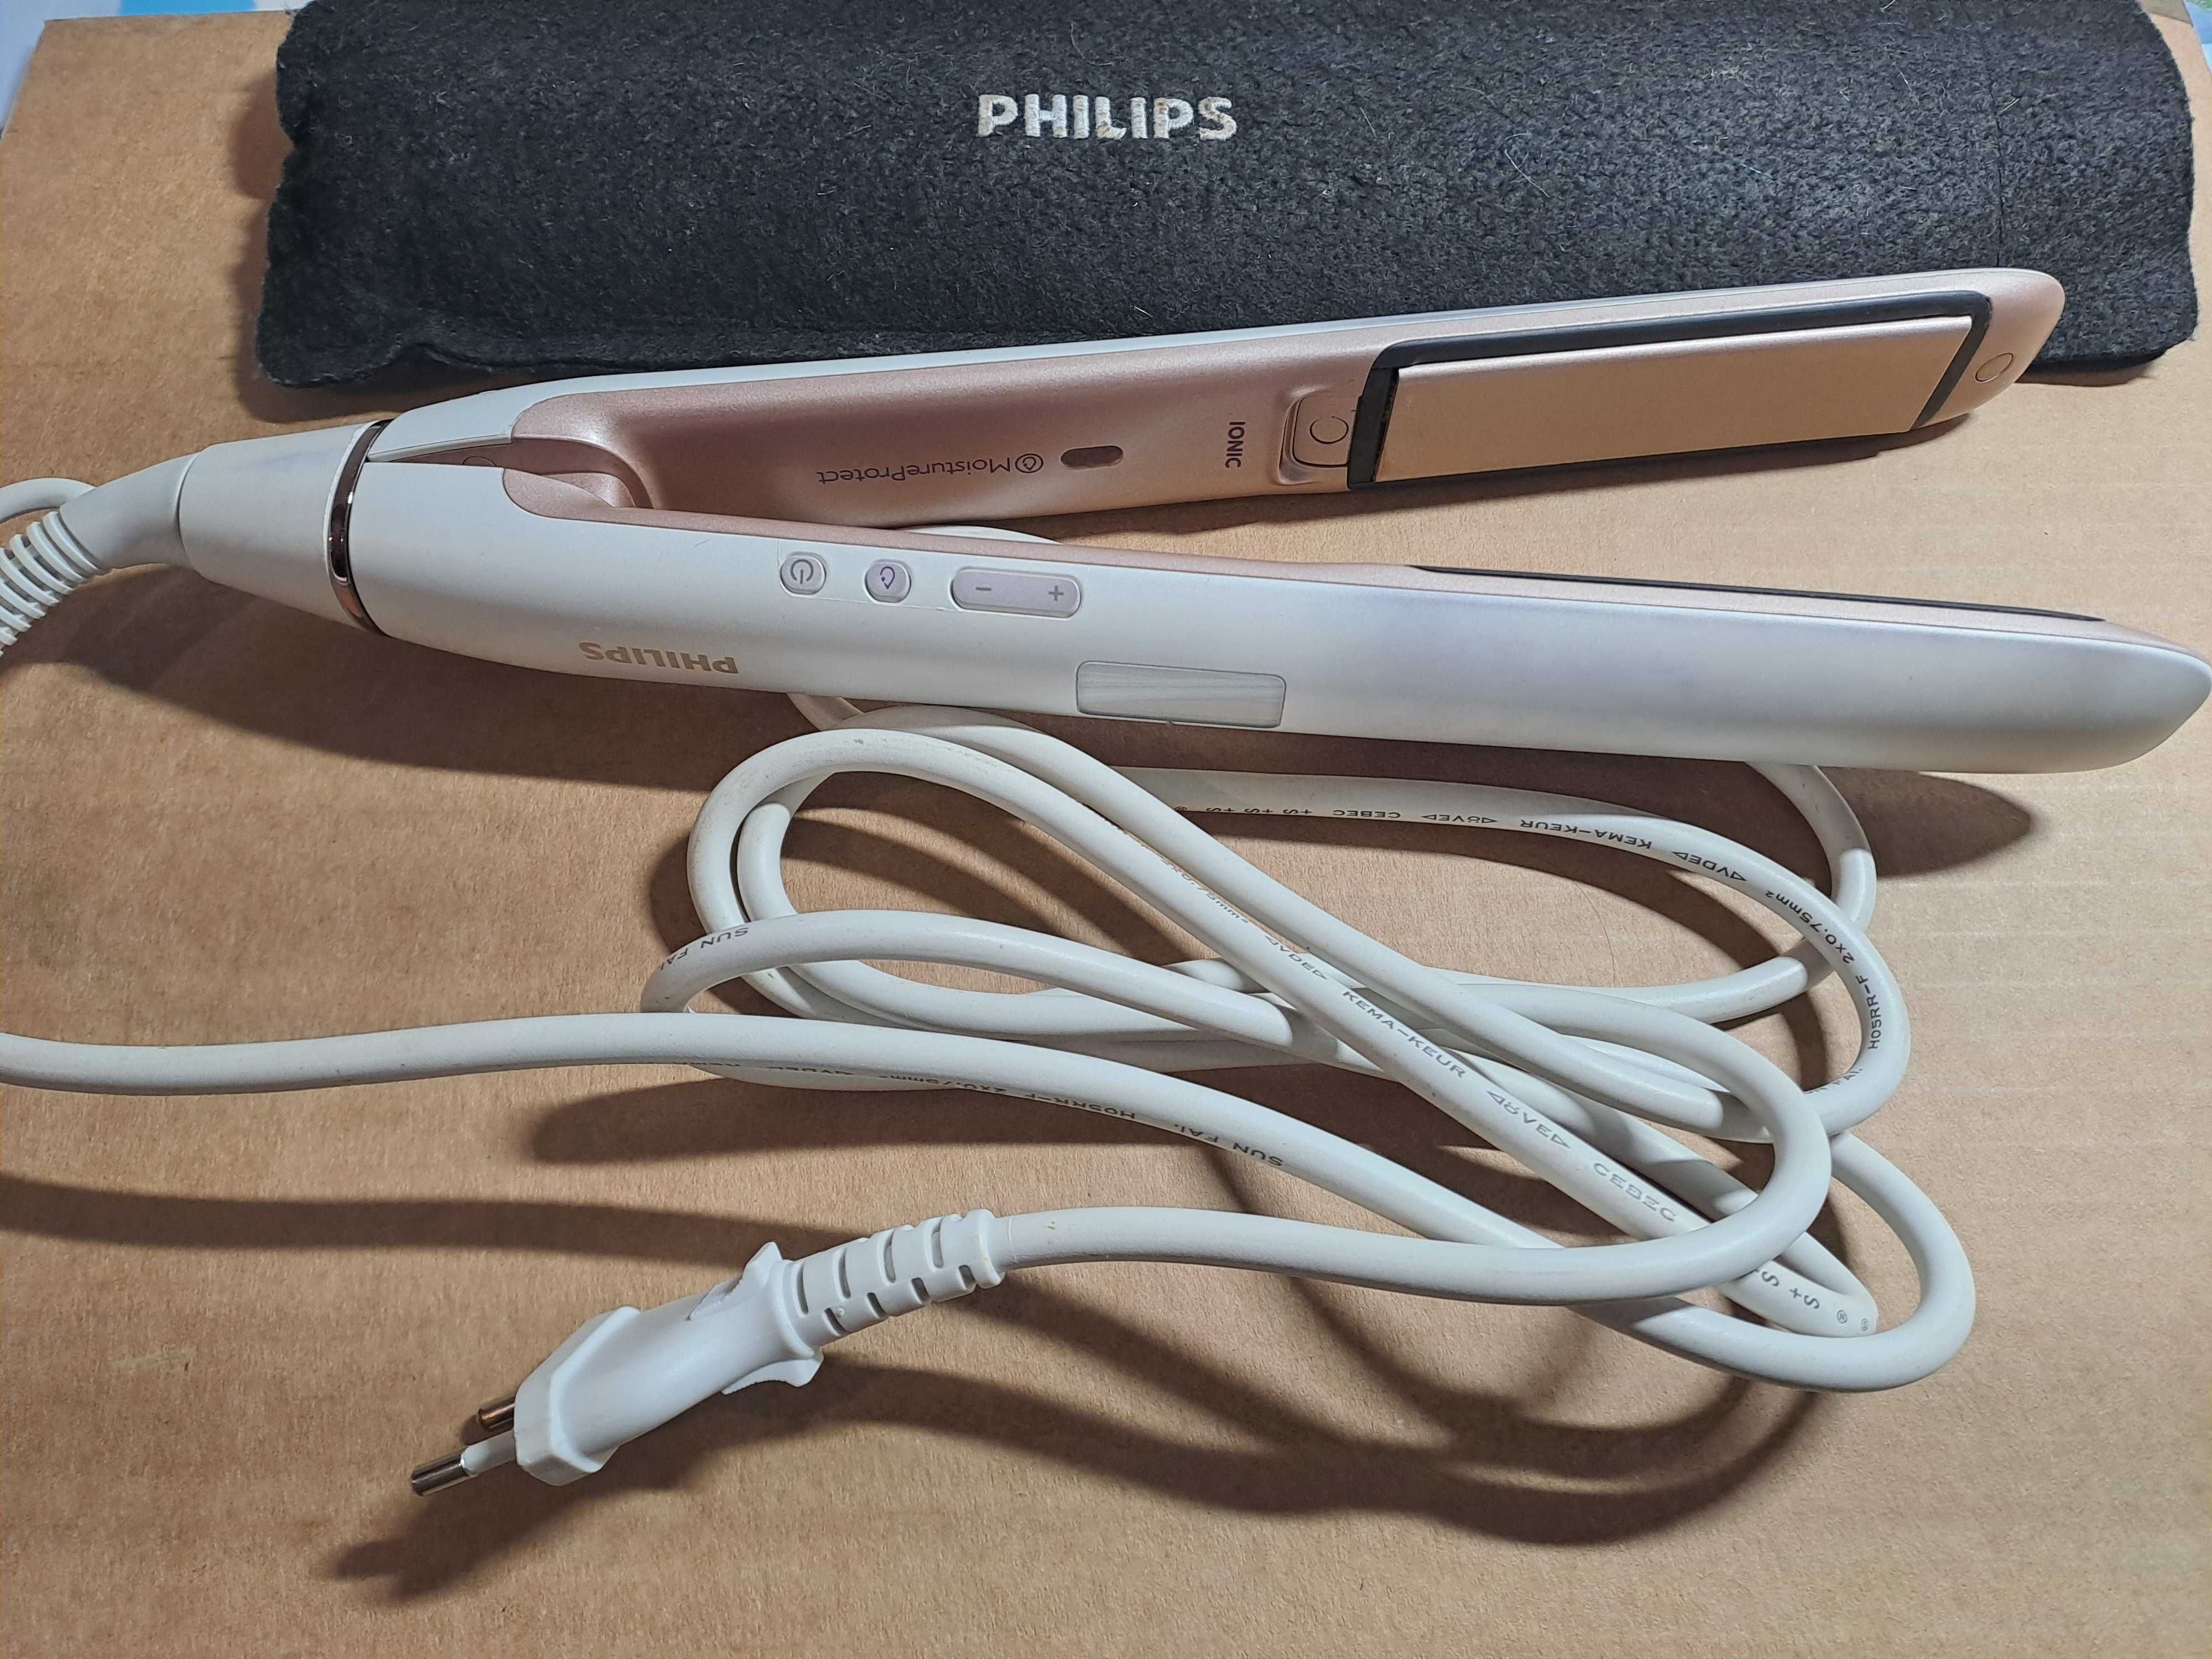 Prostownica Philips HP8372/00 Opis!